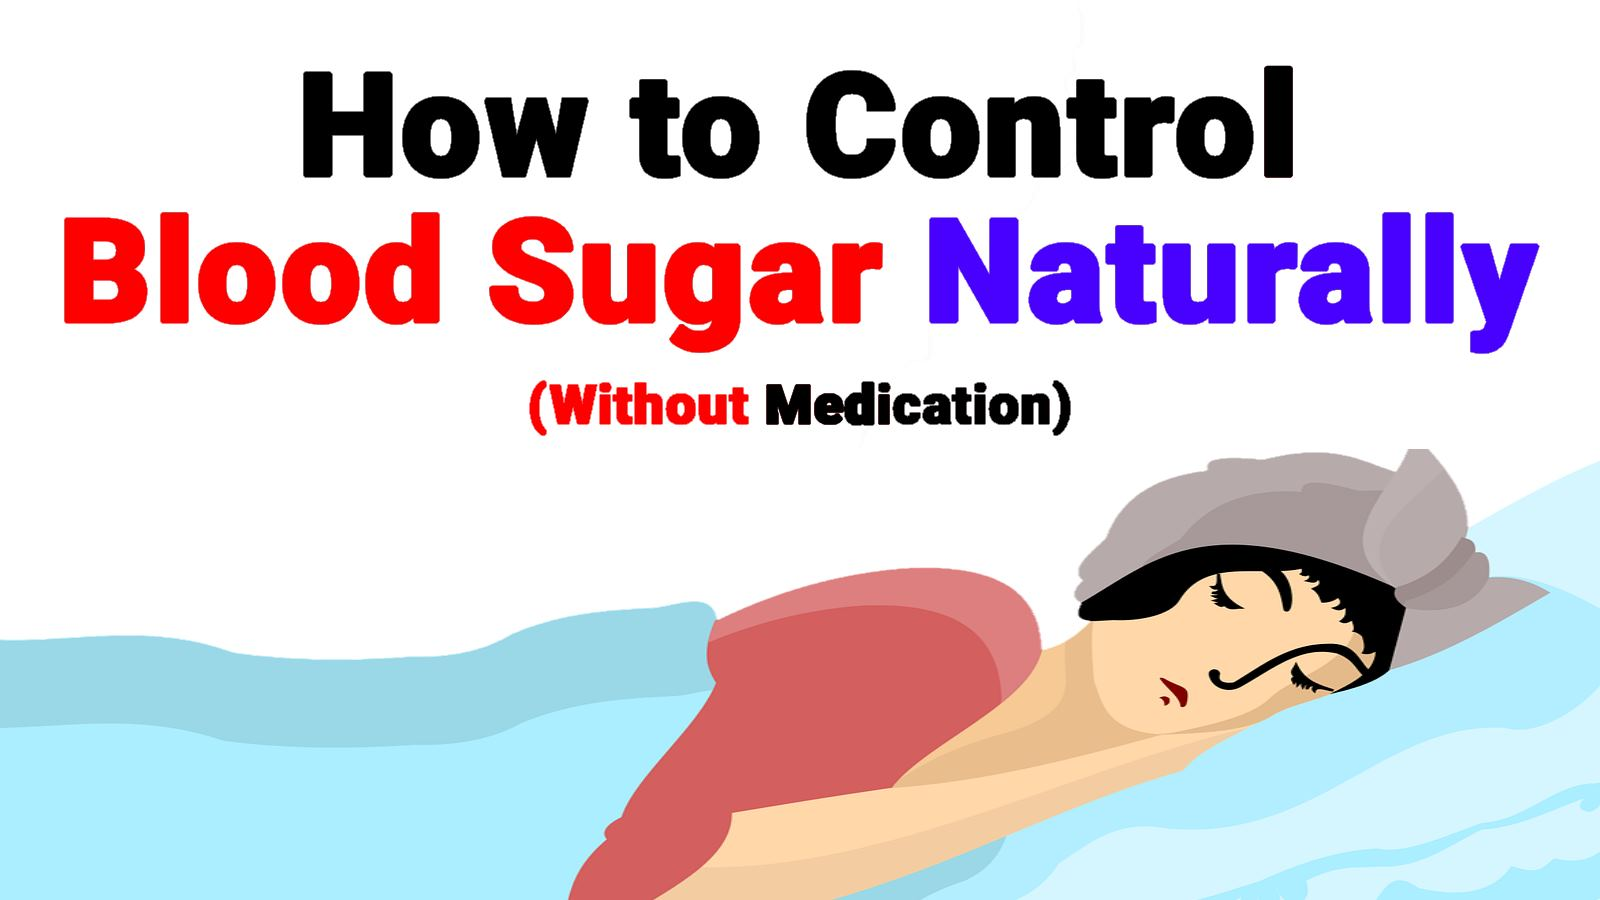 Diabetes: How to control blood sugar? 4 lifestyle changes